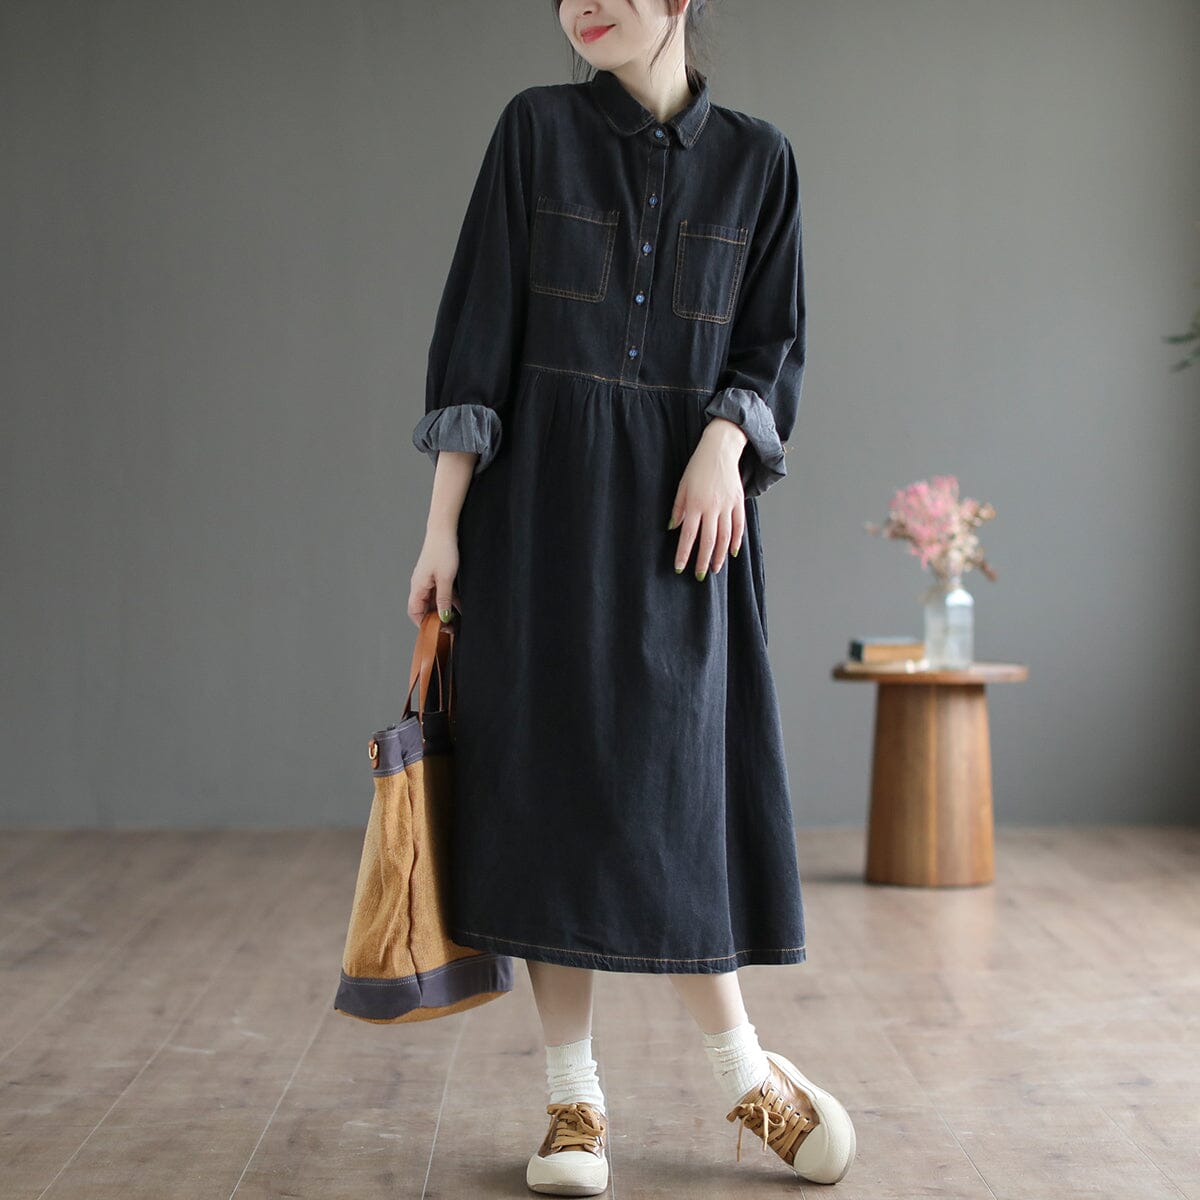 Spring Loose Solid Casual Cotton Denim Dress